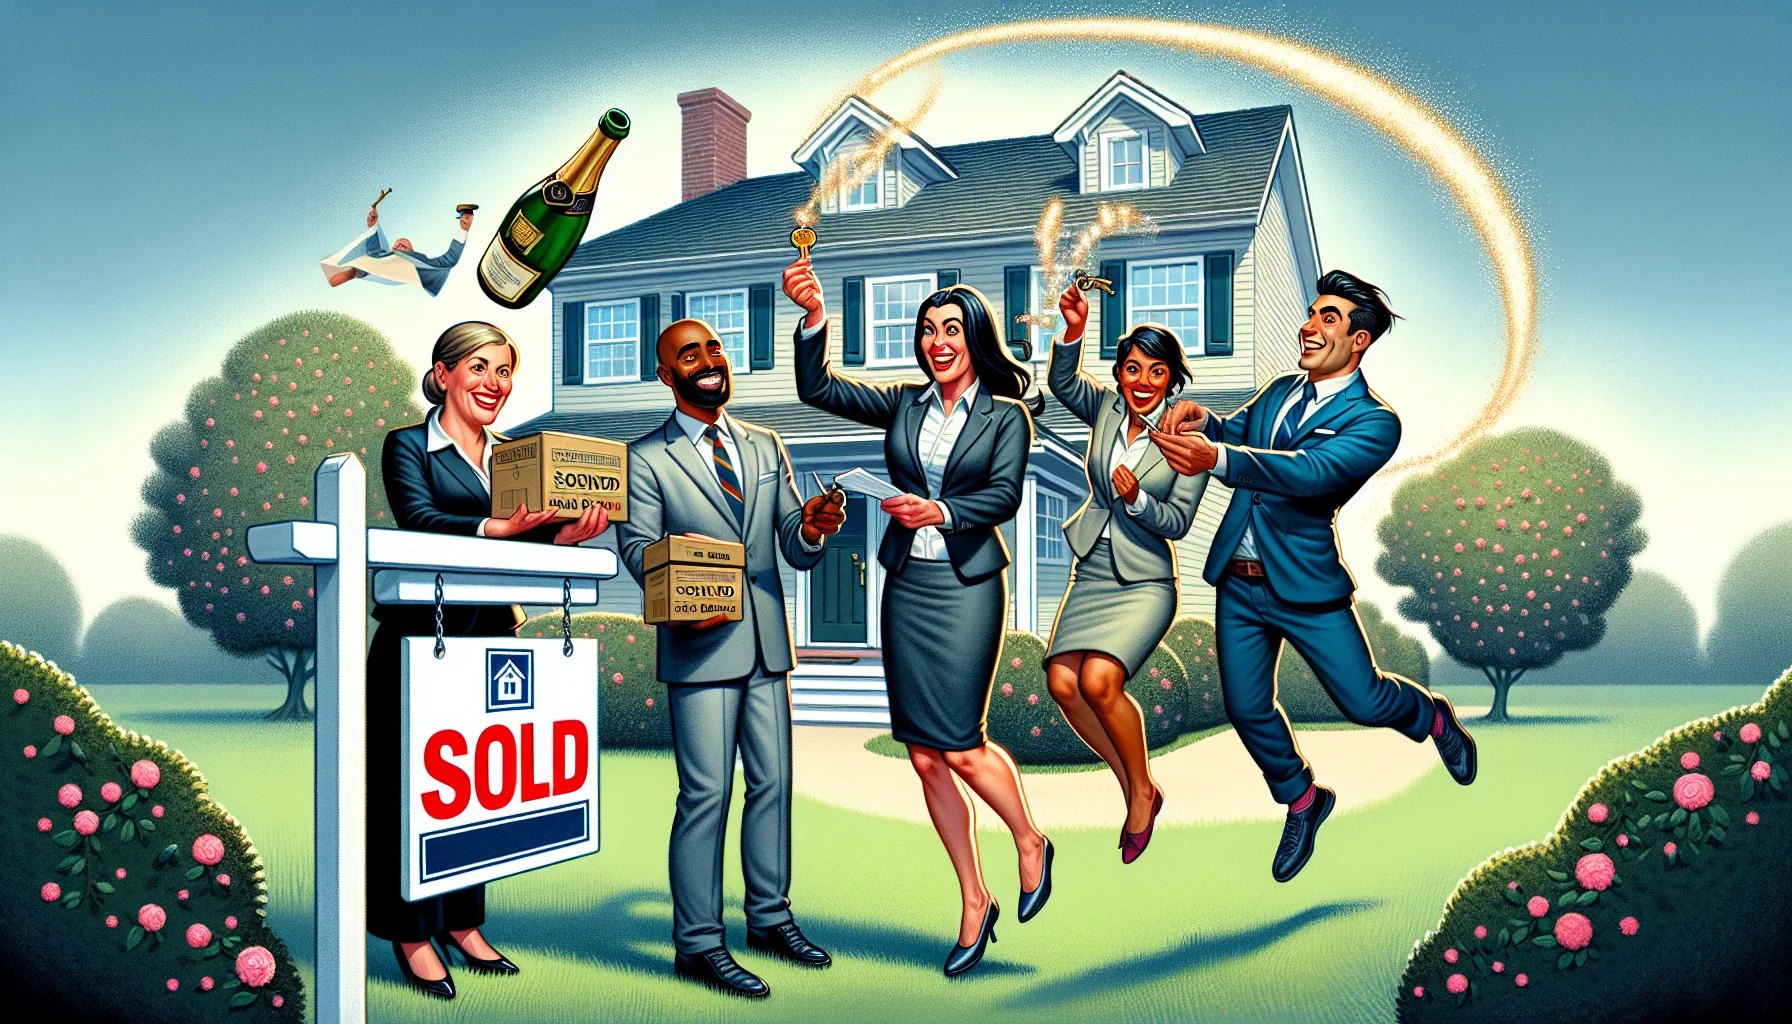 An illustration of a comedic and idealized scene related to first-time homeownership. Picture a pristine suburban house with a manicured lawn and a SOLD sign. Near the sign, a bank representative, a Caucasian woman in professional attire, hands over keys to a South Asian man, a Black woman and a Middle Eastern man - the new homeowners, all celebrating with wide smiles. Their joy is exaggerated to humorous proportions - they are jumping high in the air with excitement, tossing their hats, and a champagne bottle pops in the background. Remind it's an idealization of real-estate perfection.